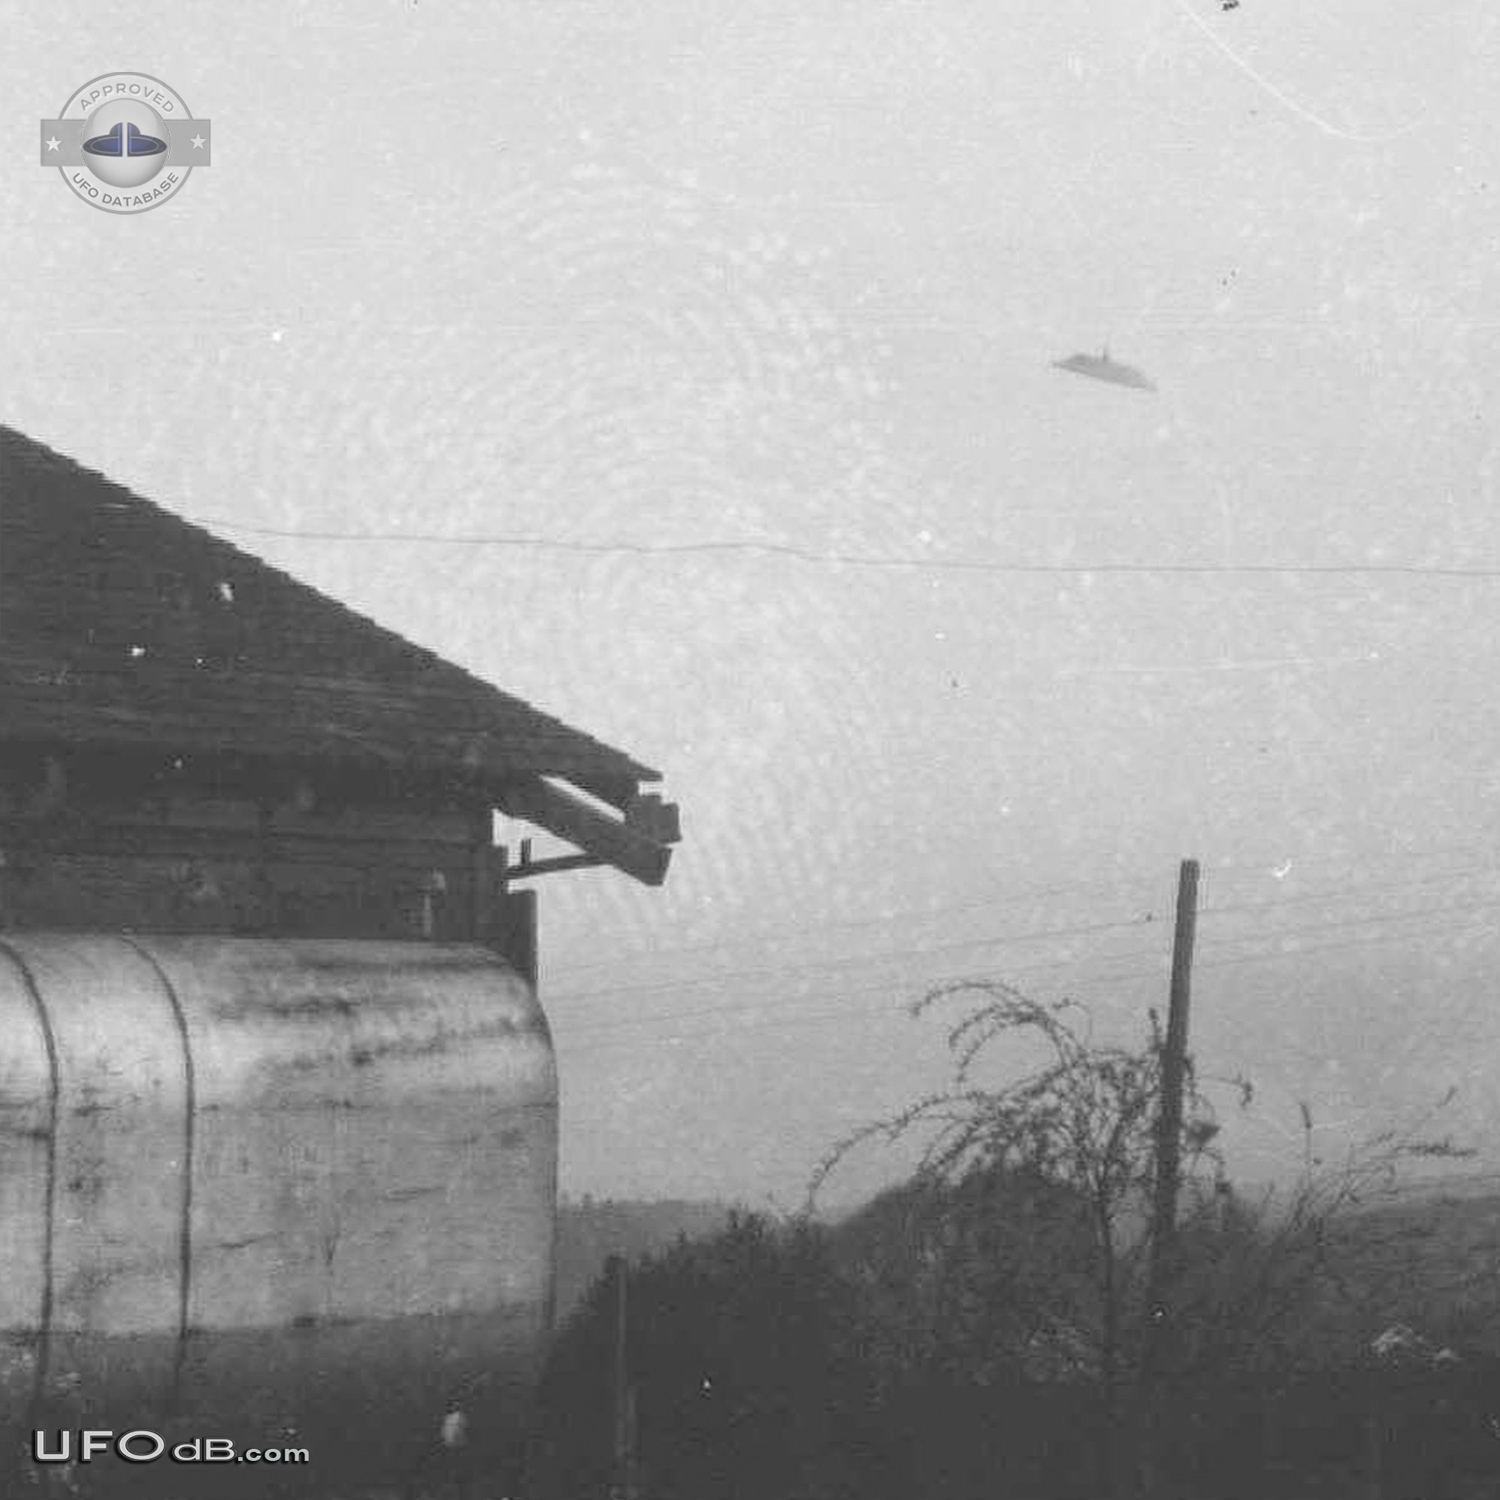 One of the Best UFO picture of all time - 1950 McMinnville, Oregon UFO Picture #423-2